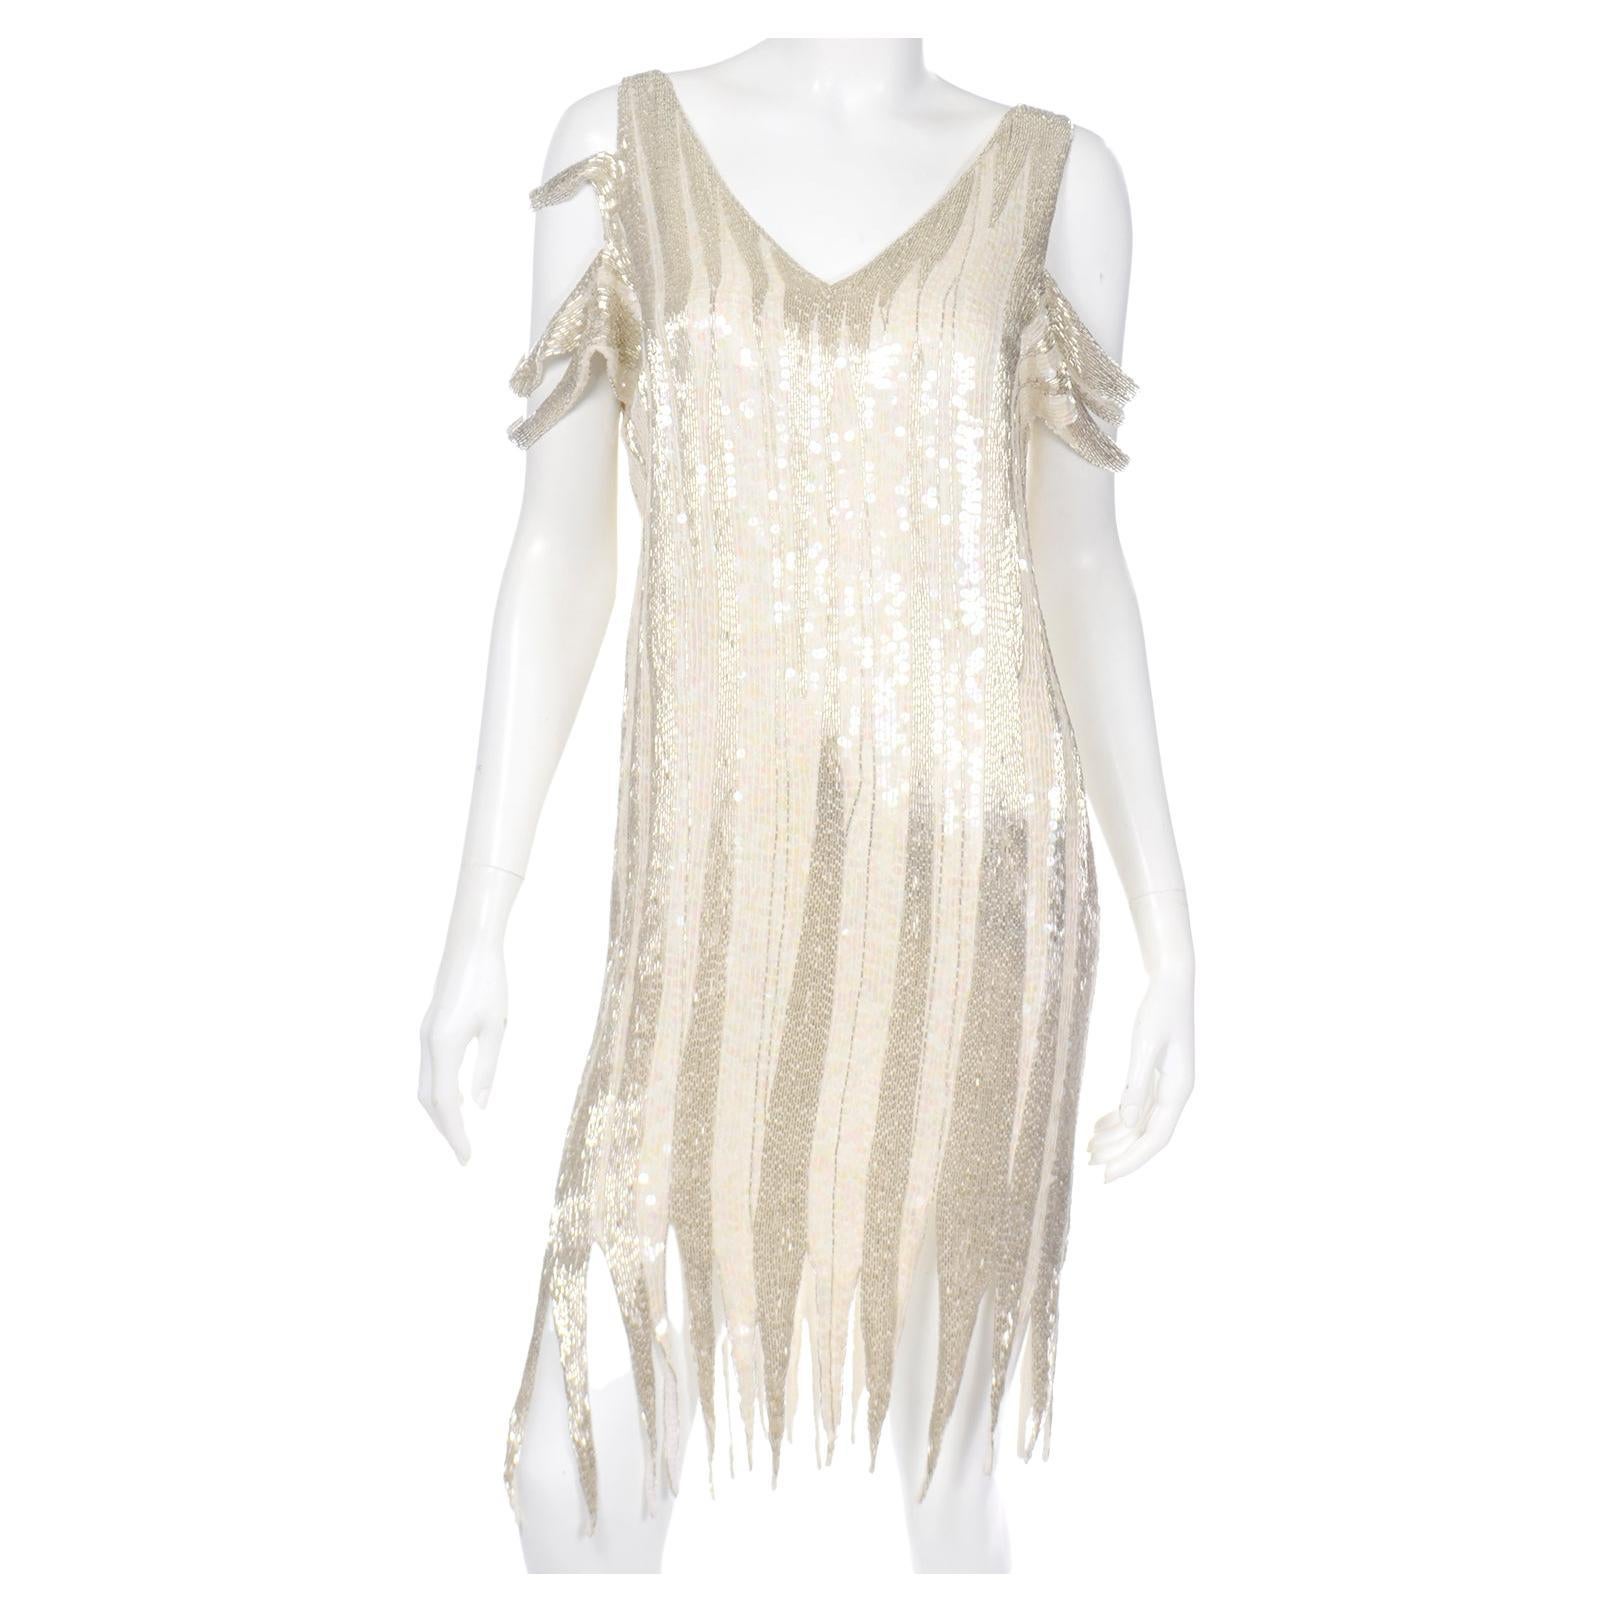 20s Inspired White & Silver Beaded Flapper Style Evening Dress w Beads & Sequins